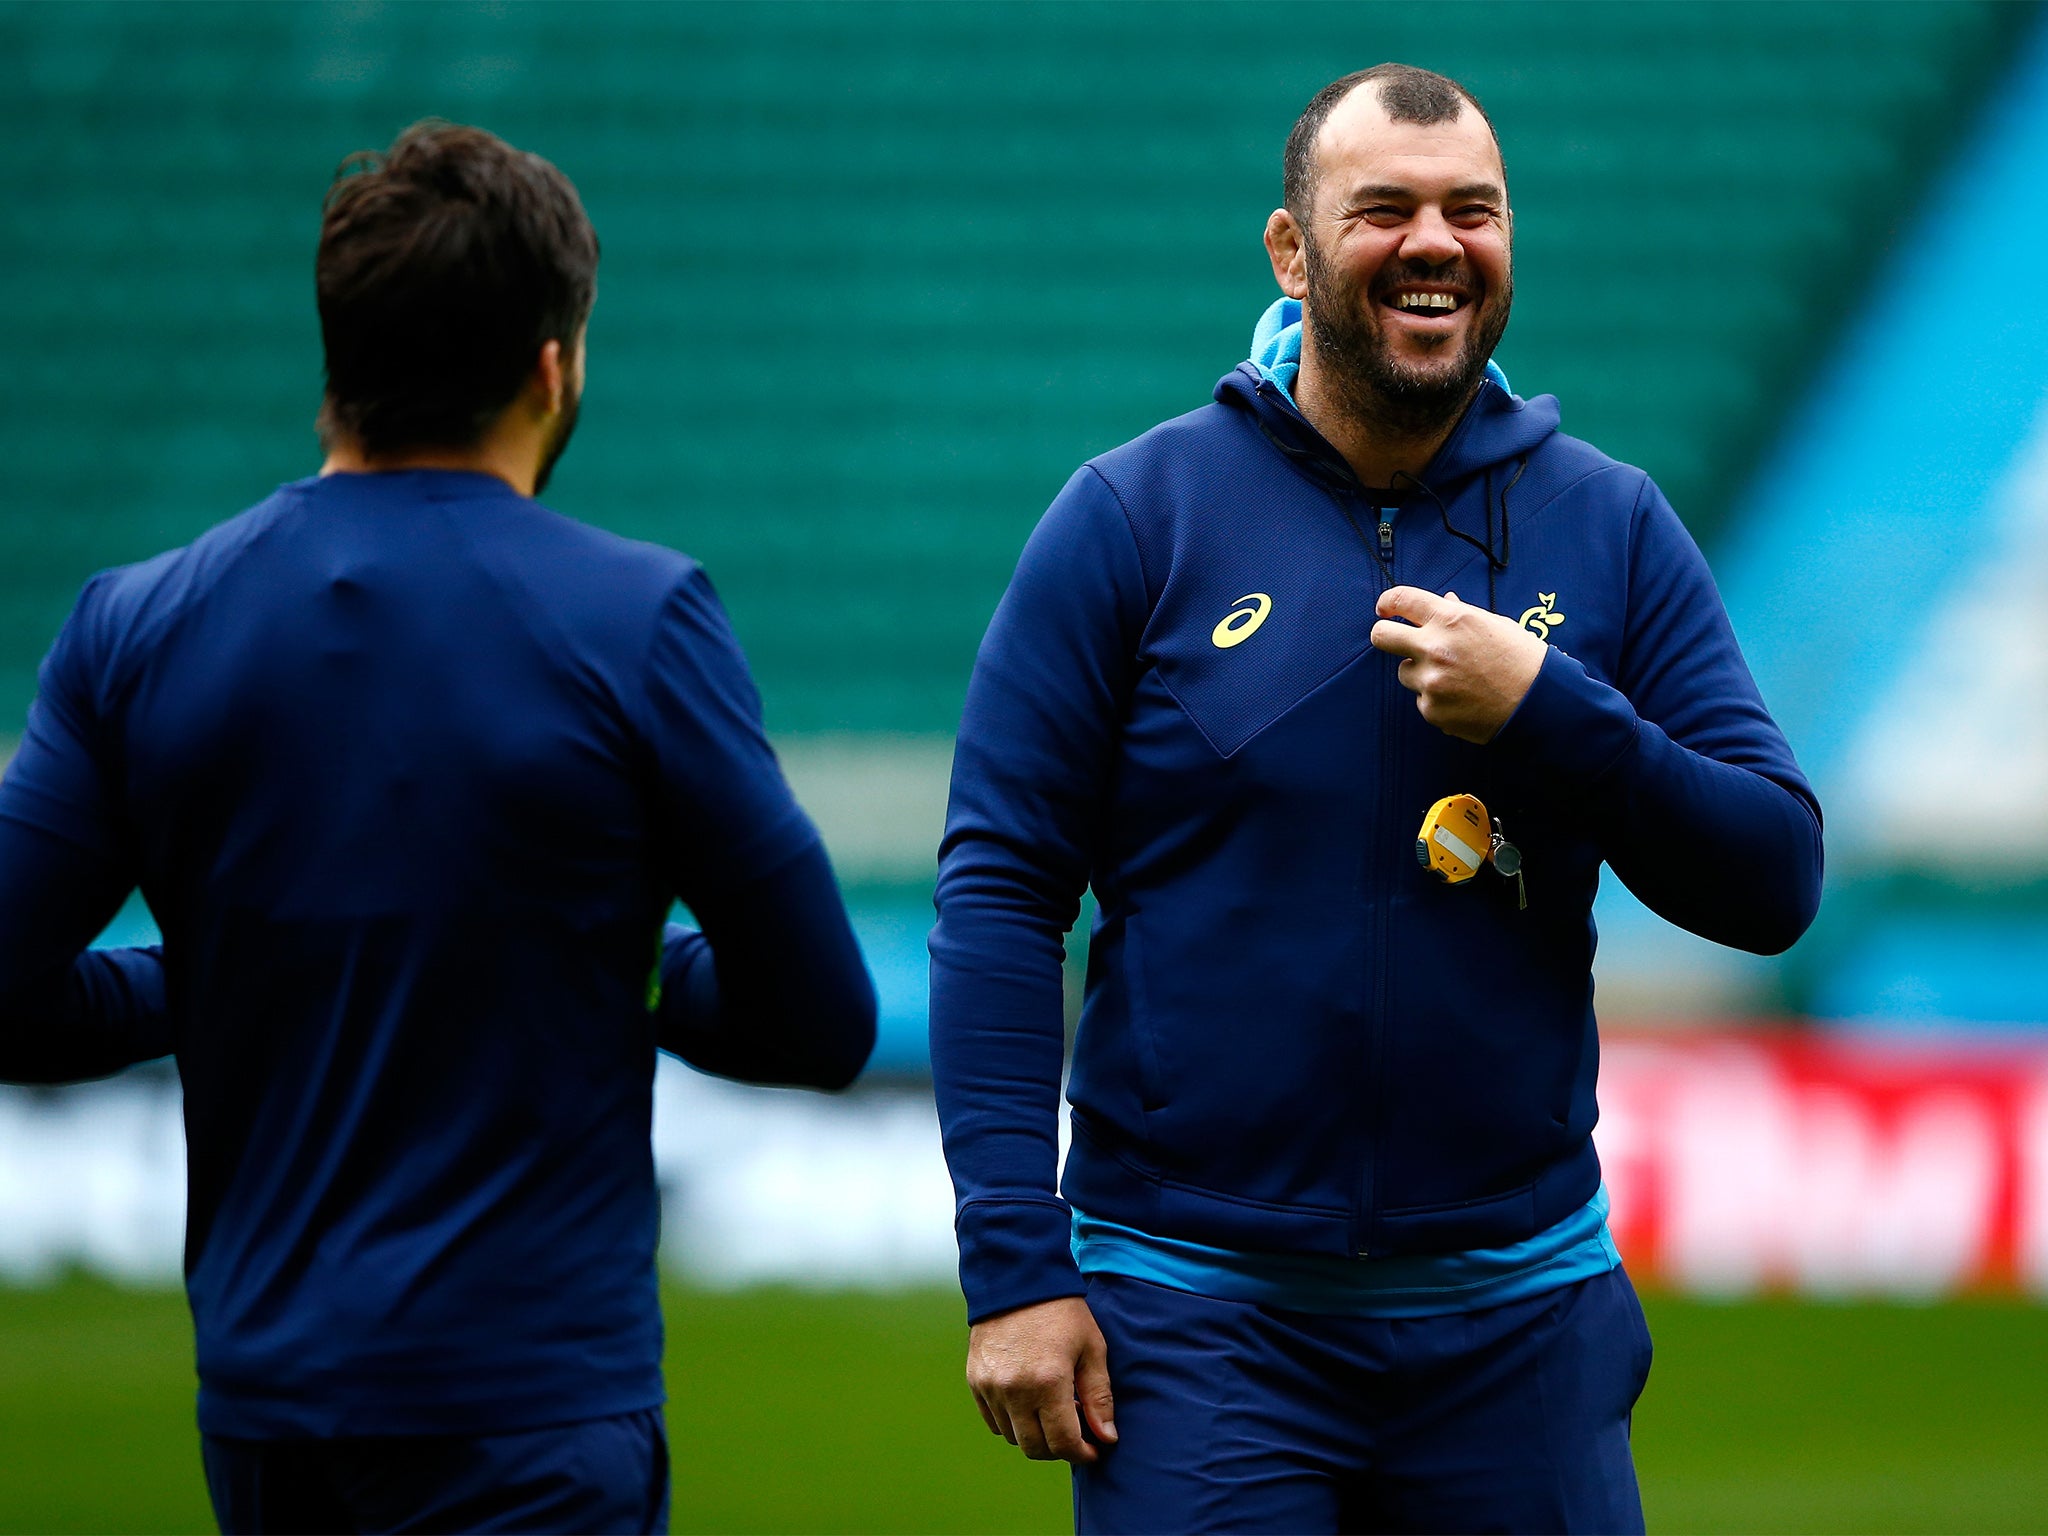 Michael Cheika, Head Coach of Australia smiles whilst talking to Adam Ashley-Cooper of Australia during the Australia Captain's Run ahead of the 2015 Rugby World Cup